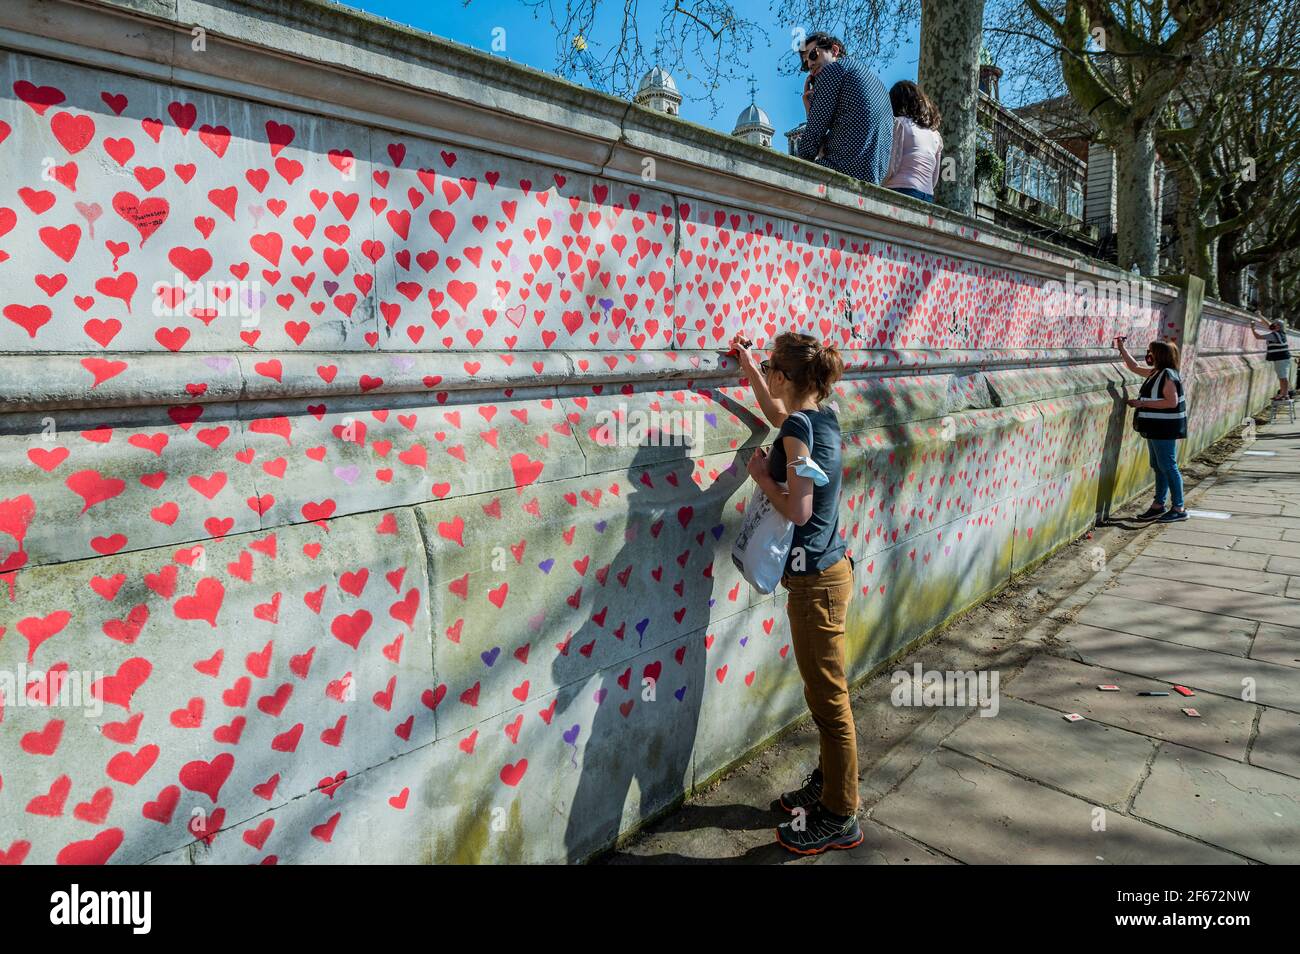 London, UK. 30 Mar 2021. The national Covid Memorial Wall outside St Thomas' Hospital on the southbank. Family and friends of some of the more than one hundred and forty-five thousand people who've lost their lives to Covid-19 are drawing hearts by hand on a wall opposite Parliament in London. Each heart represents someone who was loved. Someone who was lost too soon to Covid-19. They are organising this temporary memorial themrselves because 'they do not believe it is for those who led this country's response to Covid-19 to decide how we grieve'. Once installed they will keep the memorial up Stock Photo